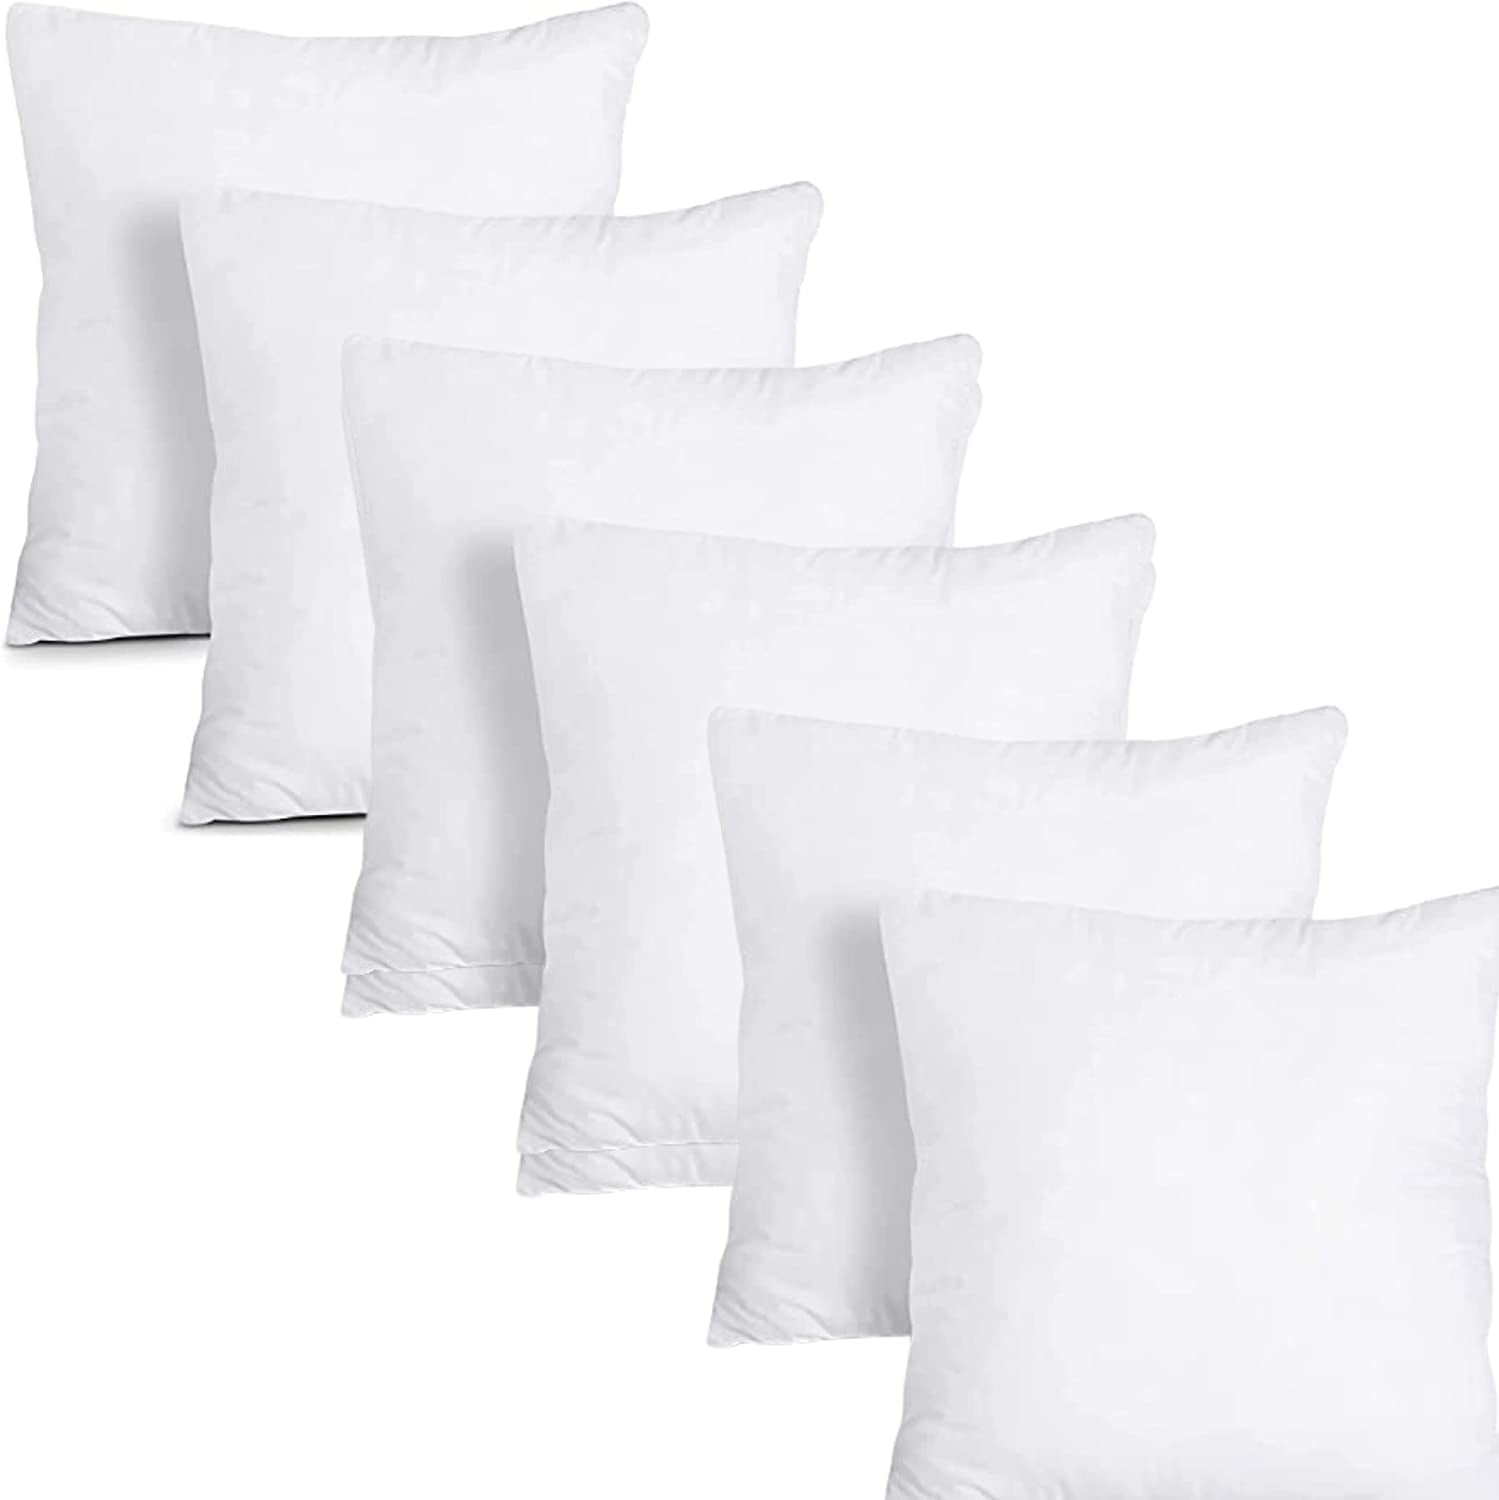 Keeble Outlets Throw Pillow Inserts - White, 18 x 18 inches, Set